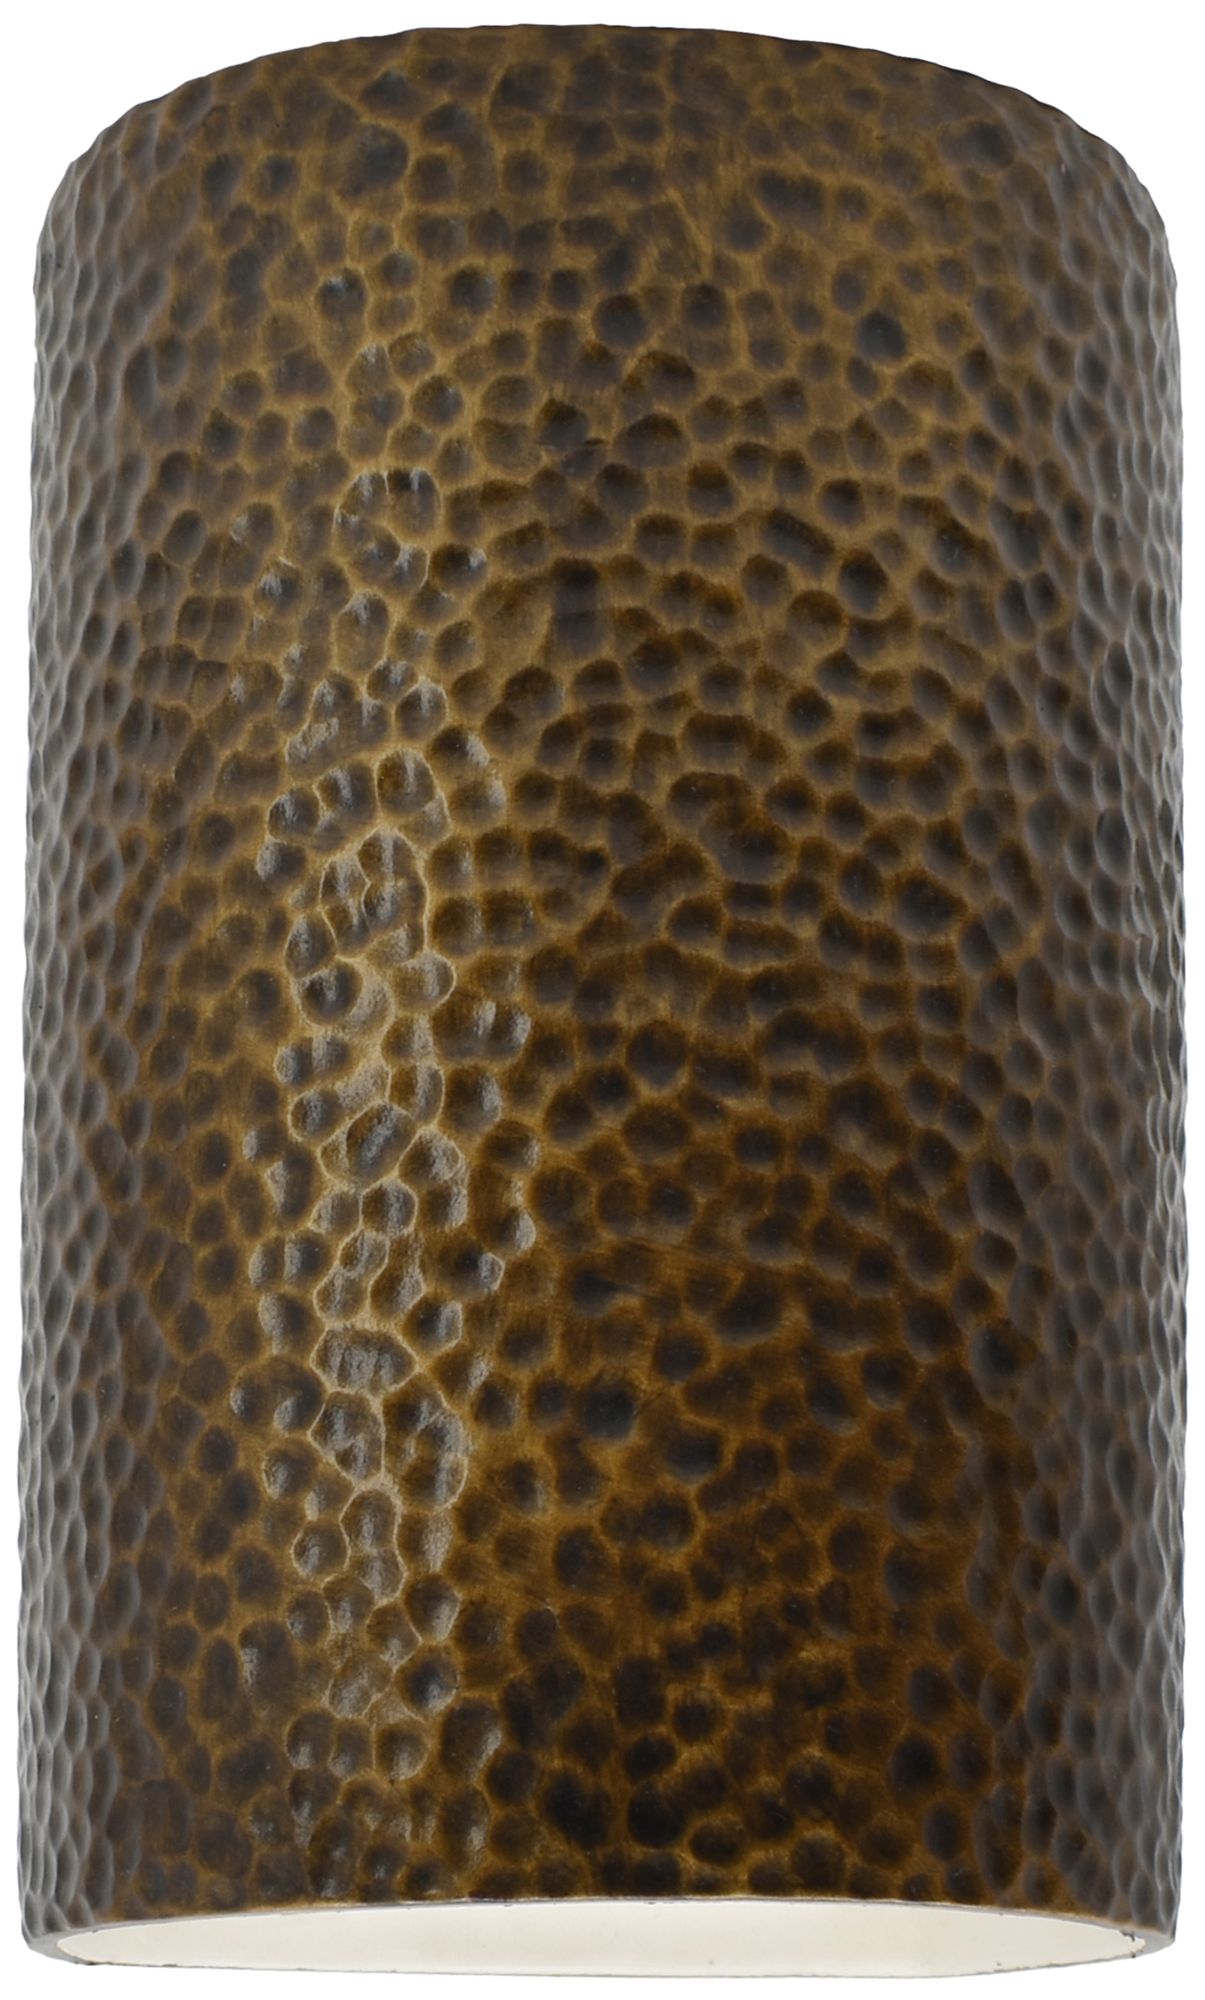 Ambiance Cylinder 5.75" Hammered Polished Brass Closed Top ADA Wall Sc